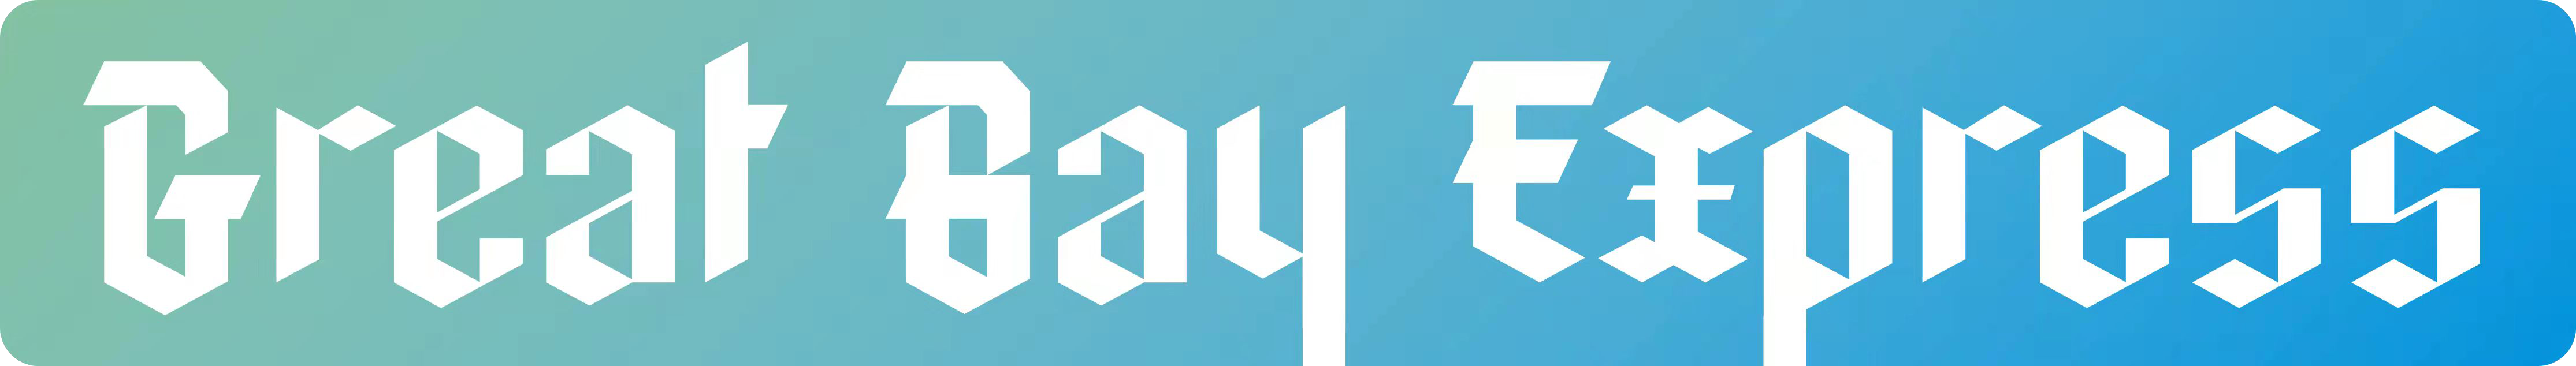 Great Bay Express-a comprehensive English media including a website, a magazine, and a number of social media accounts